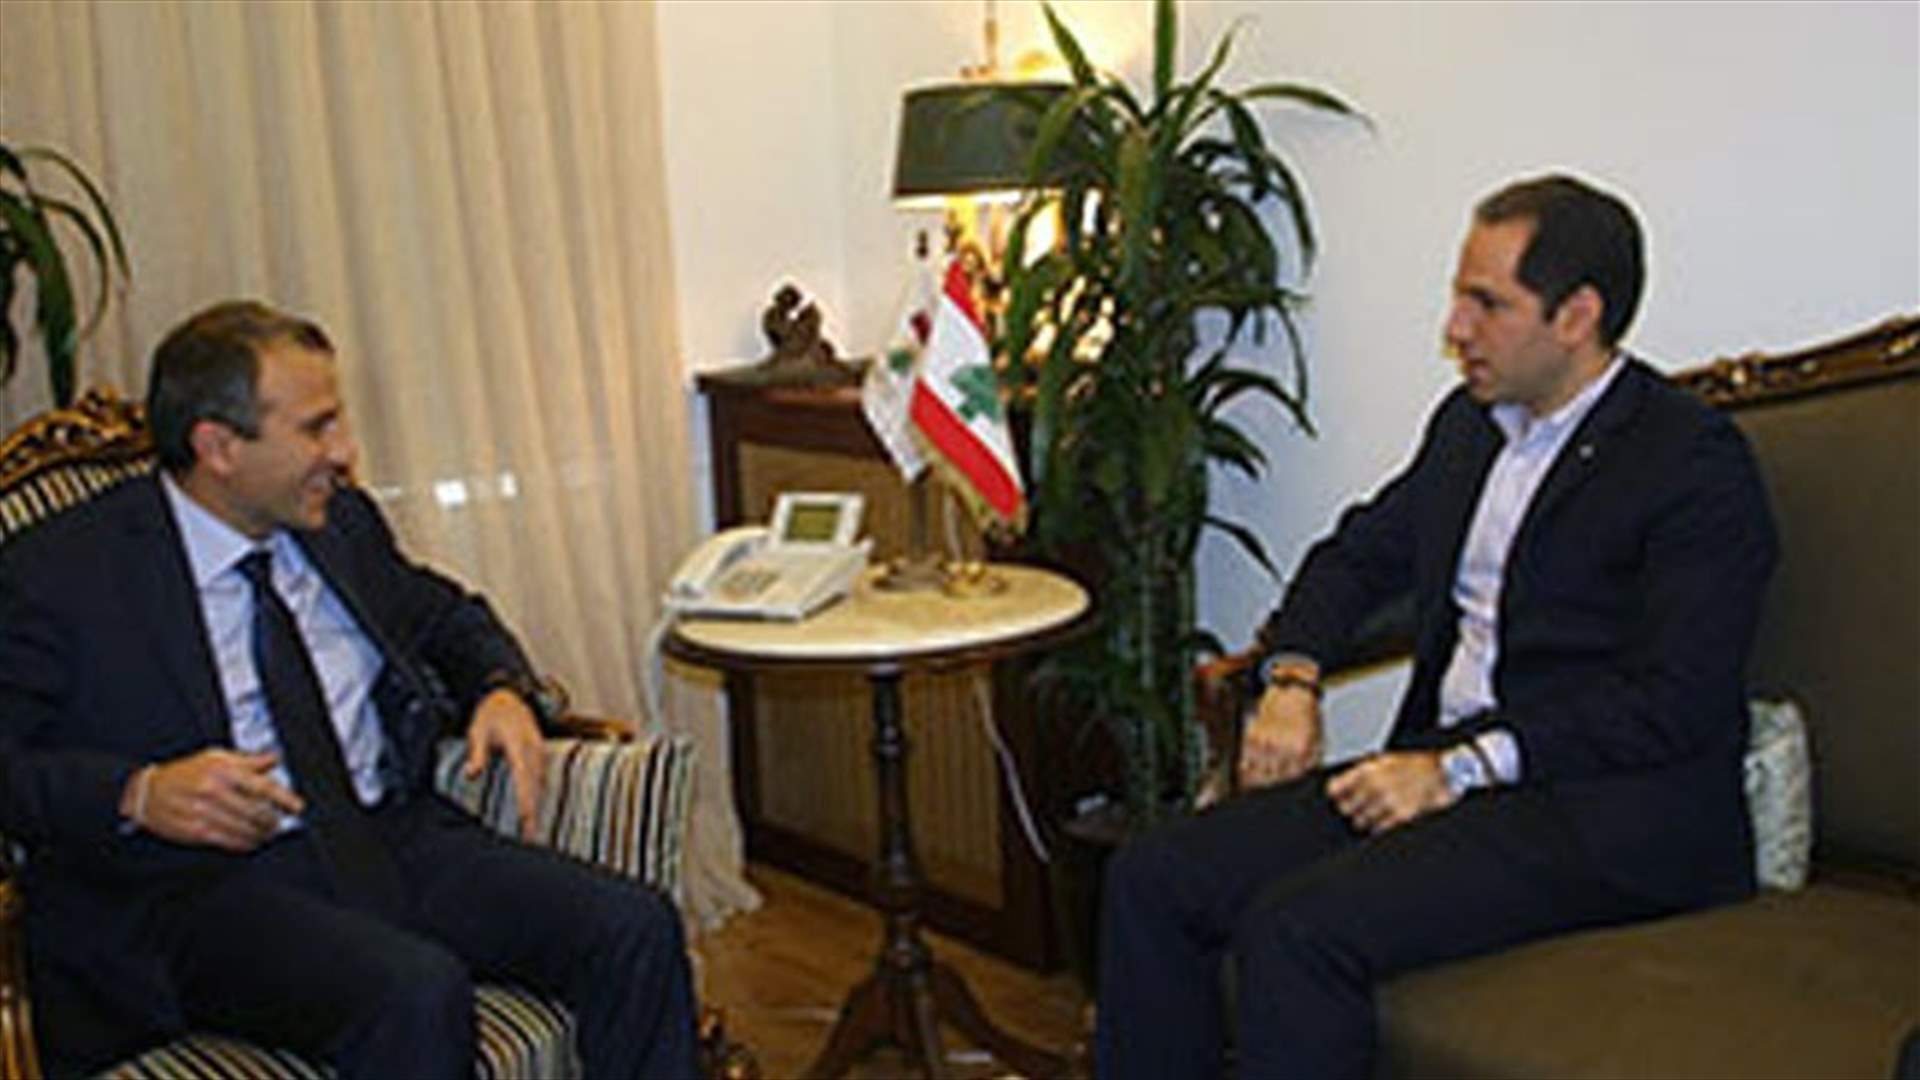 MP Gemayel meets with Minister Bassil, says Kataeb will stand by president